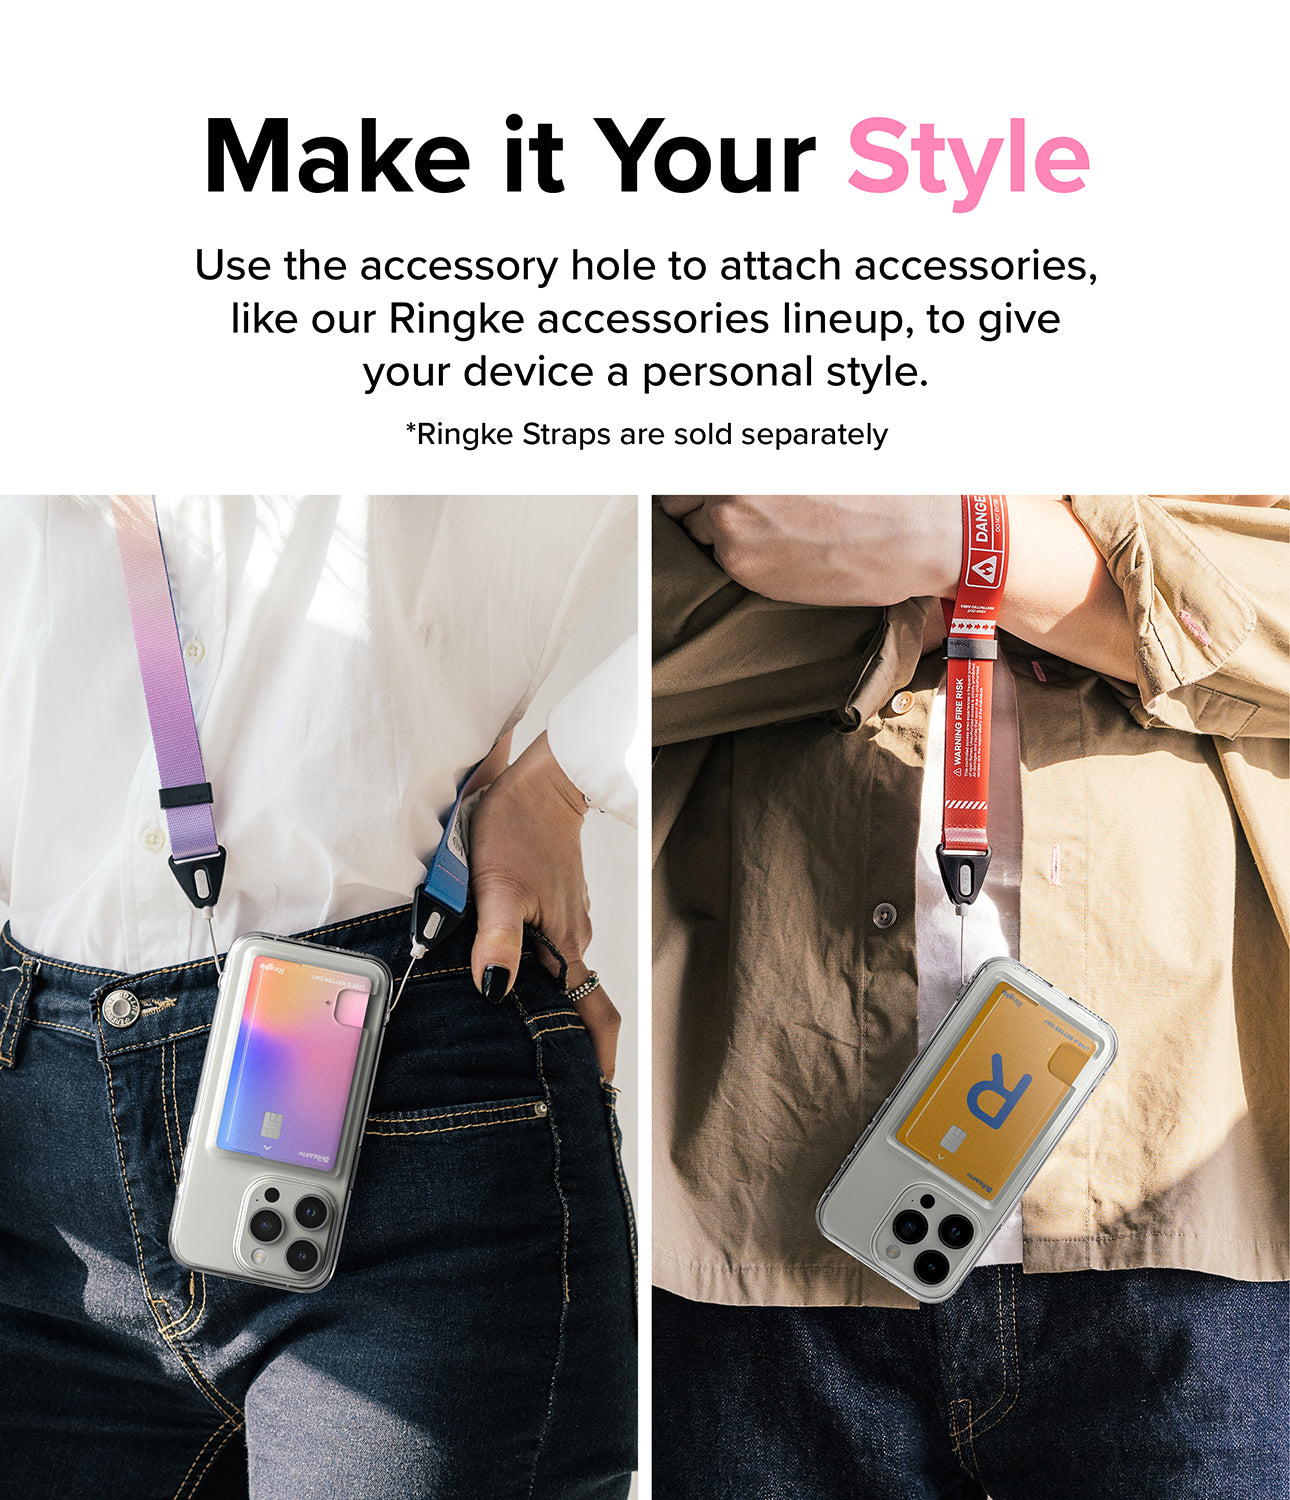 iPhone 15 Pro Case | Fusion Card - Make it Your Style. Use the accessory hole to attach accessories, like our Ringke accessories lineup, to give your device a personal style.